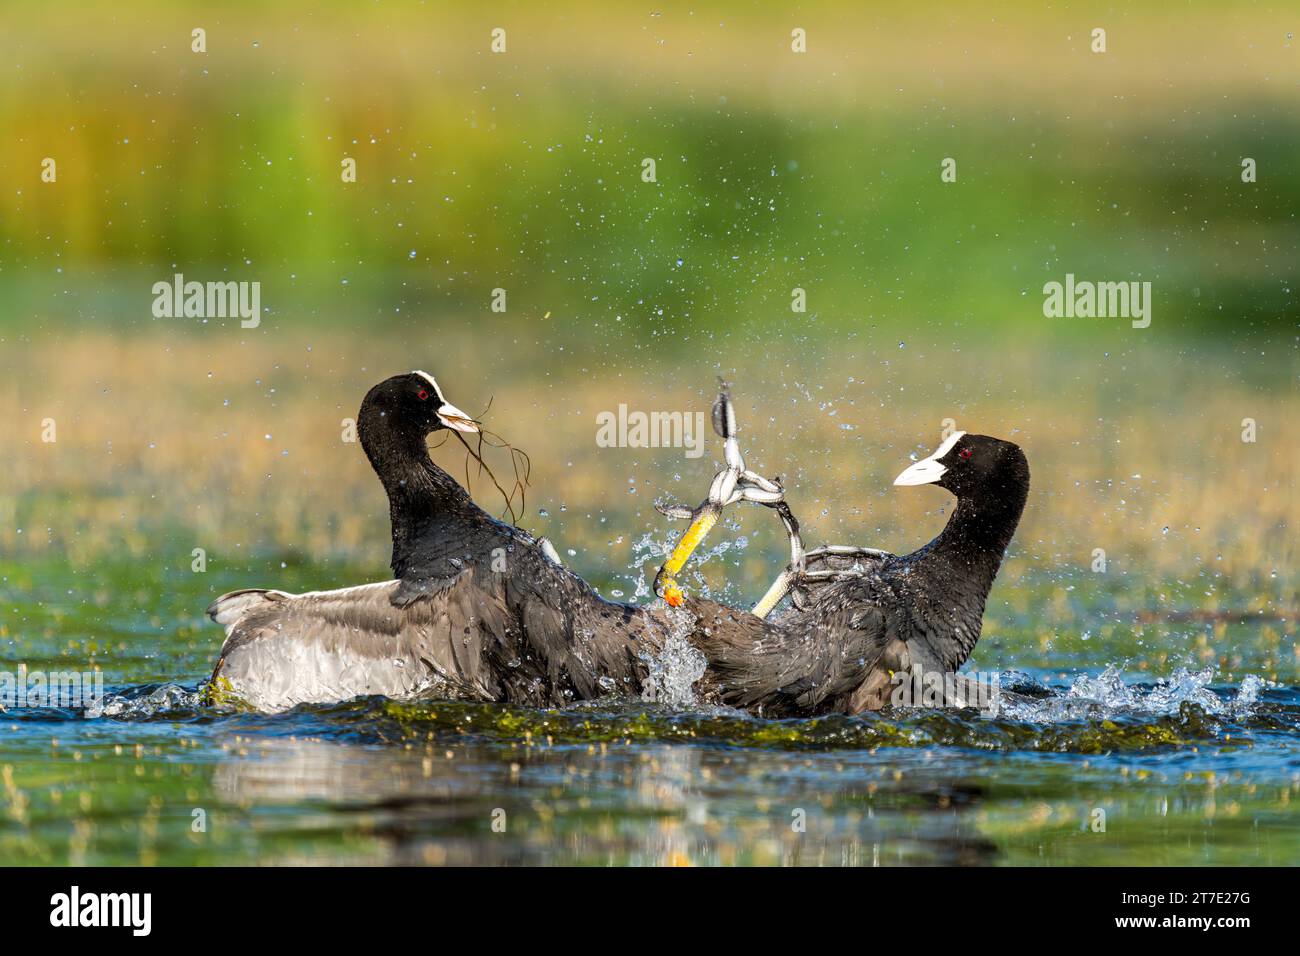 The two Coot (Fulica atra) birds in physical altercation wading in a tranquil pond Stock Photo